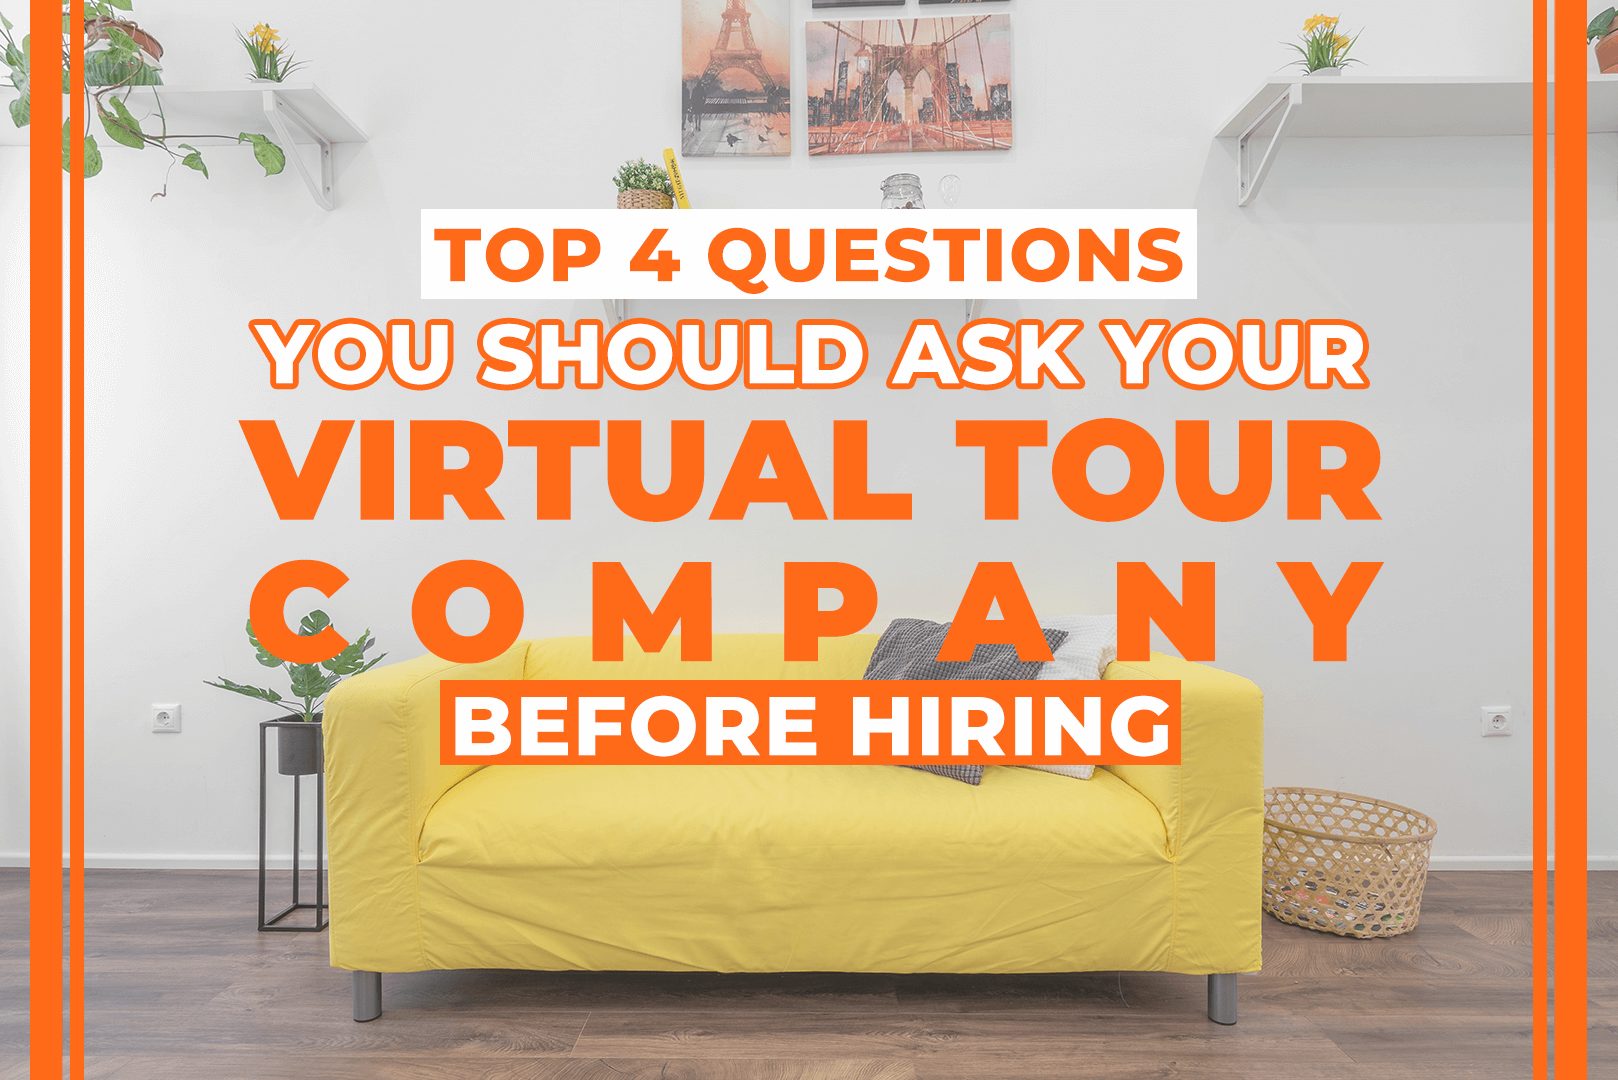 Top 4 Questions You Should Ask Your Virtual Tour Company Before Hiring